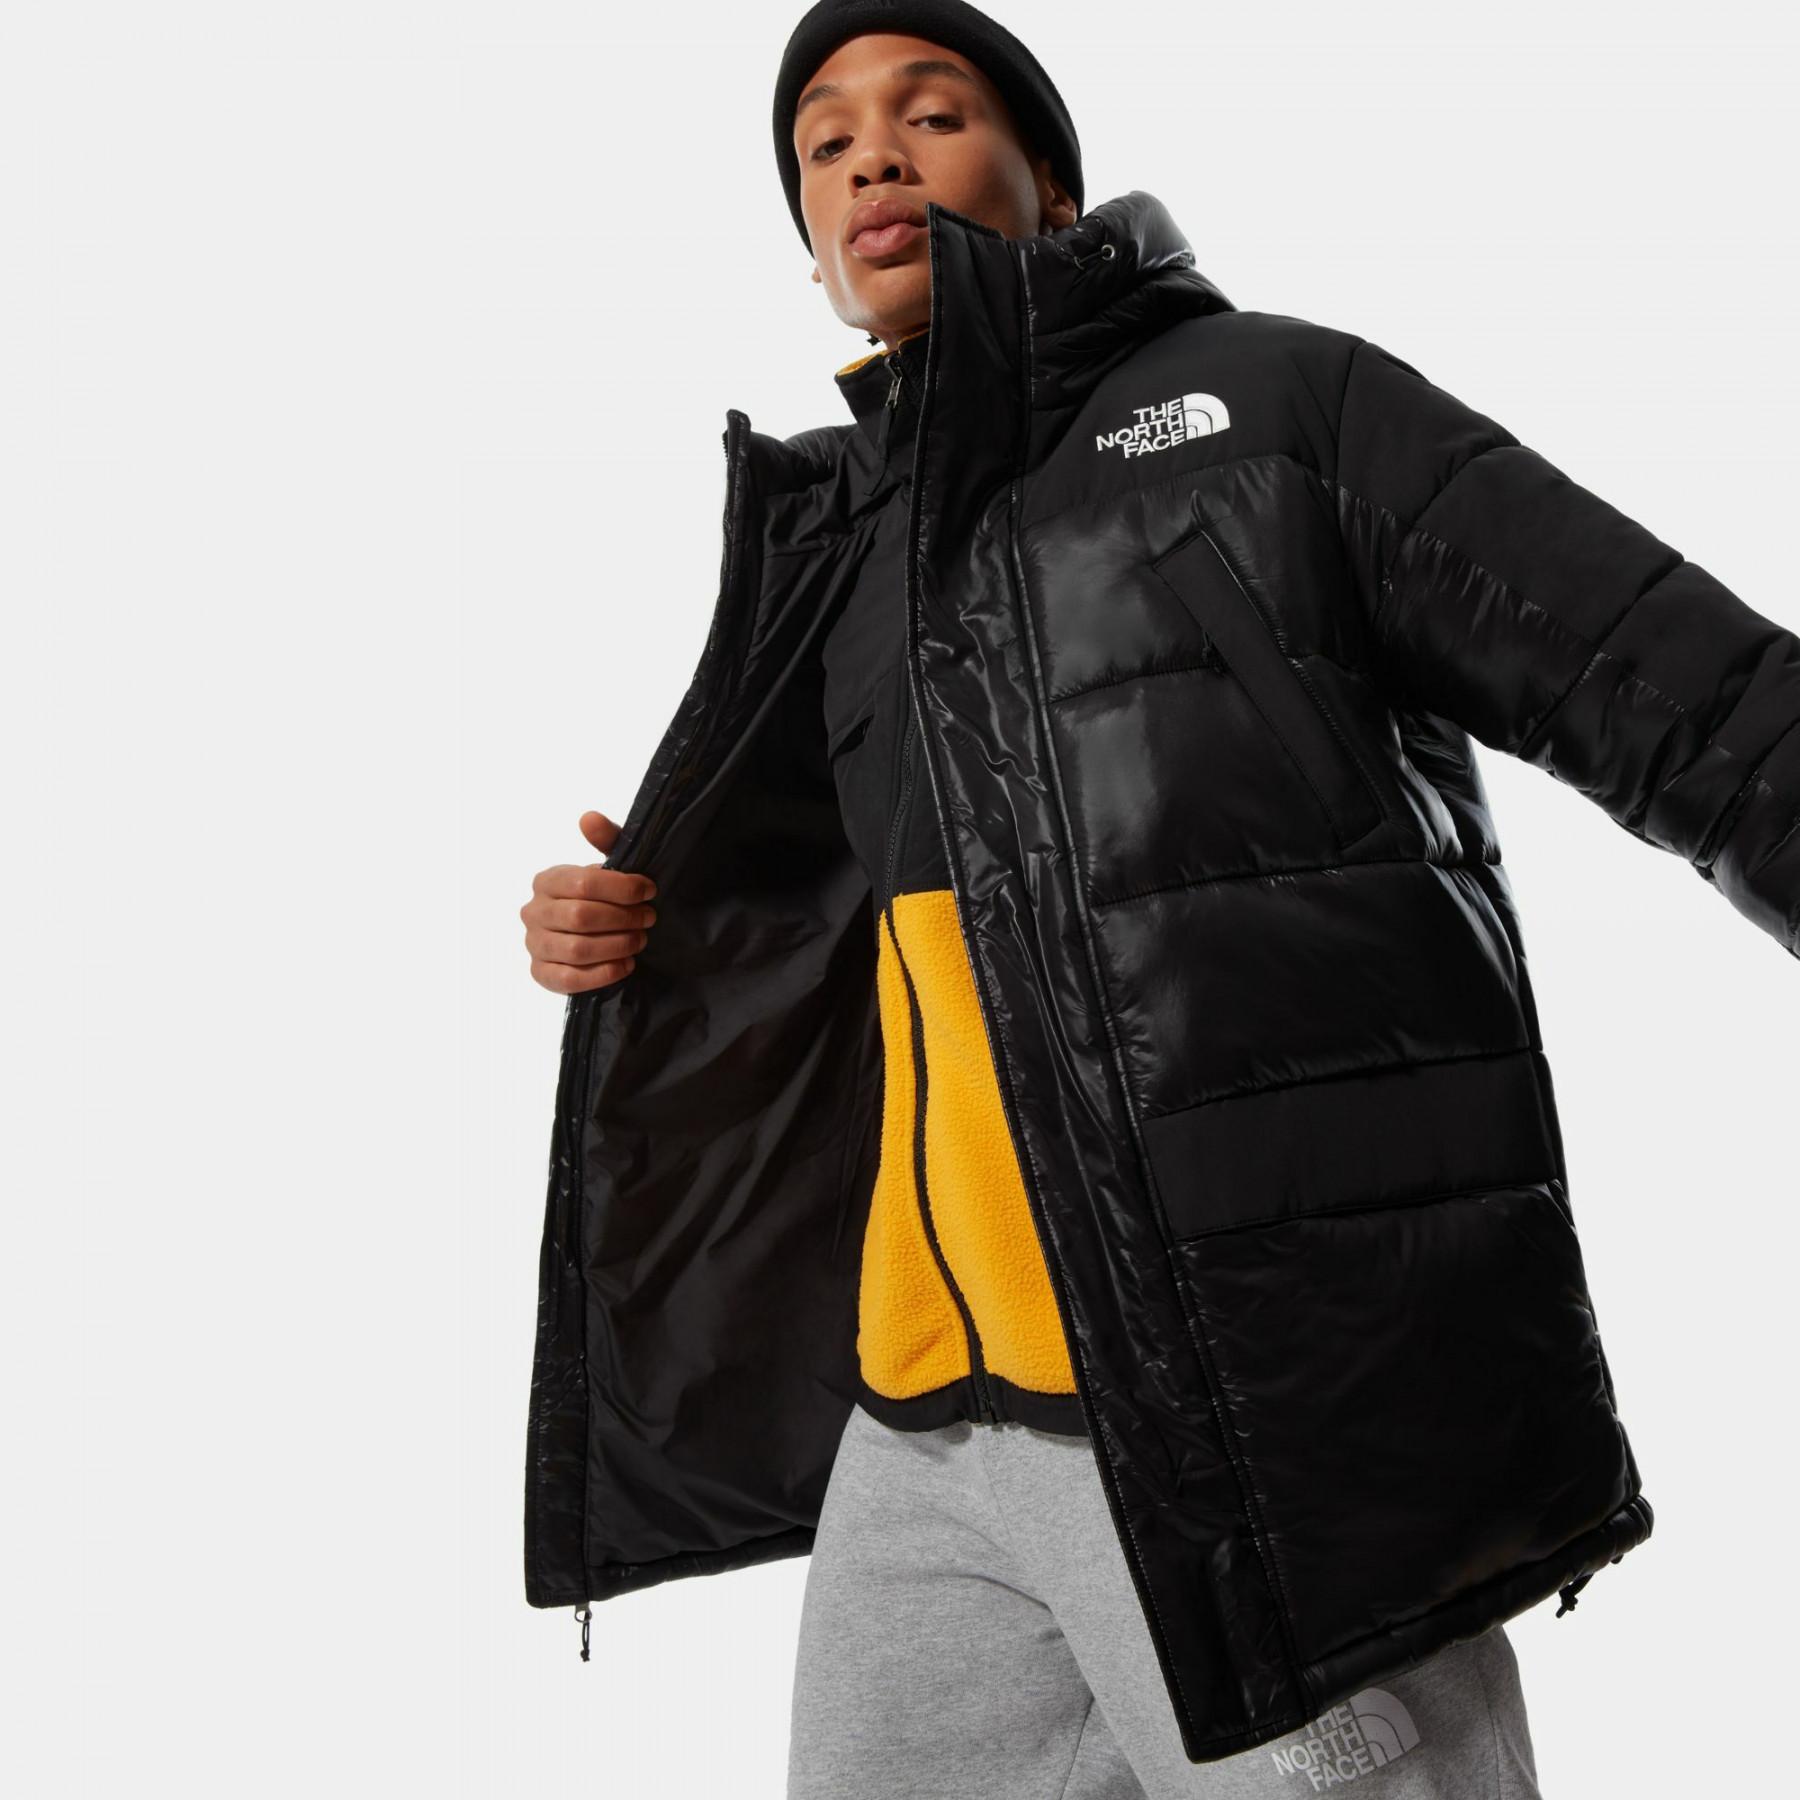 Parka The North Face Hmlyn Insulated